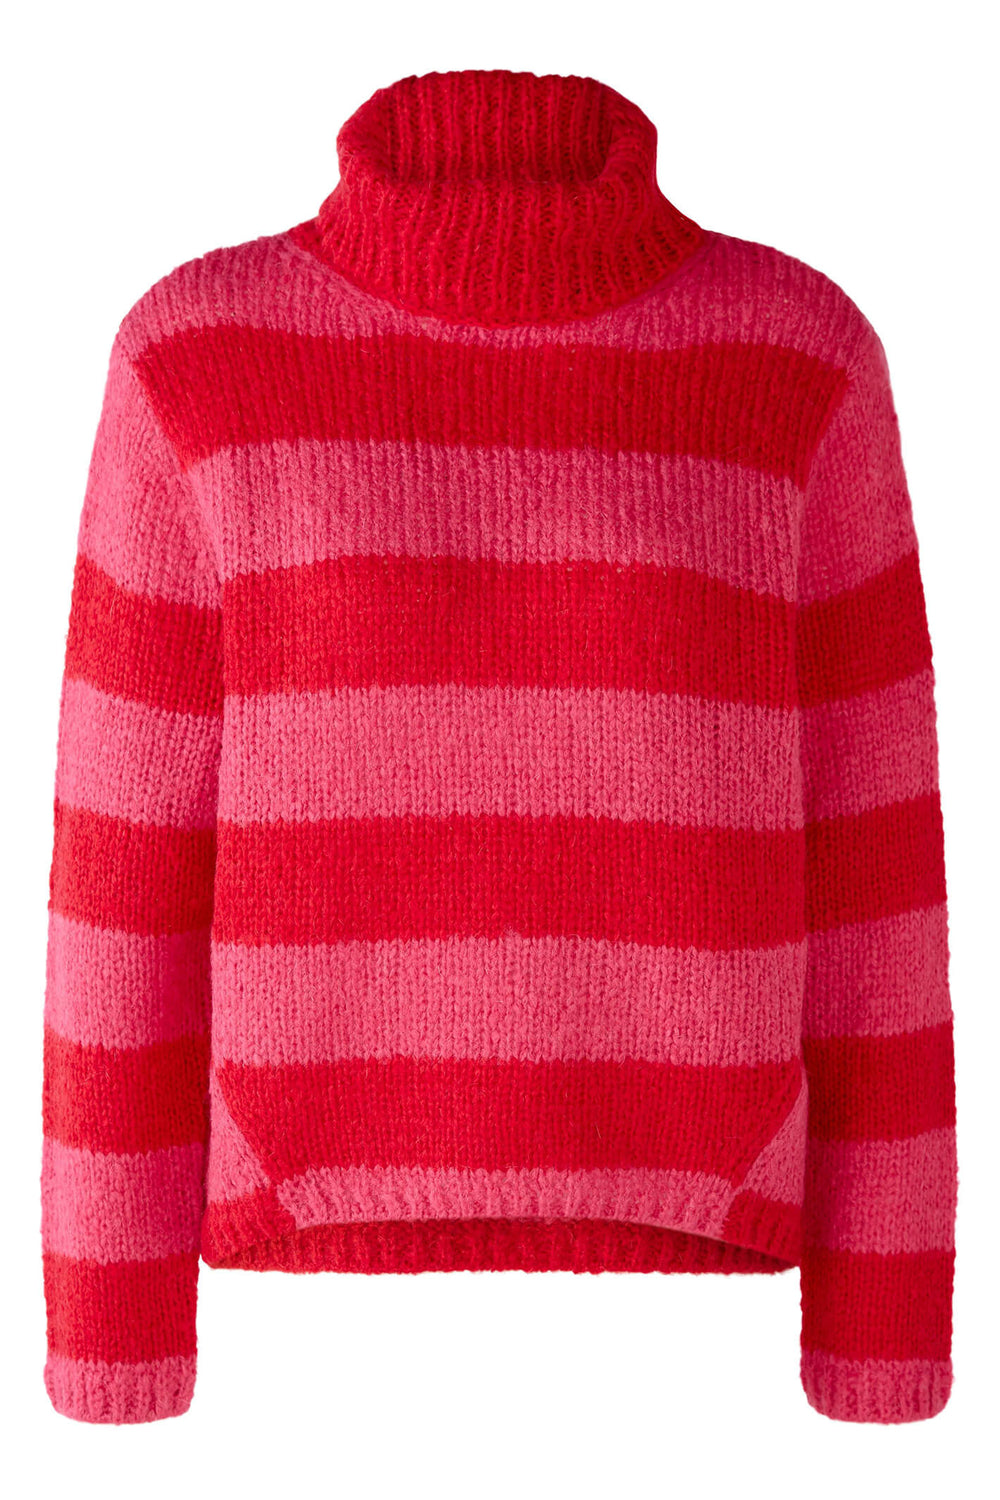 Oui 79577 Red Rose Stripe Roll Neck Jumper - Dotique Chesterfield